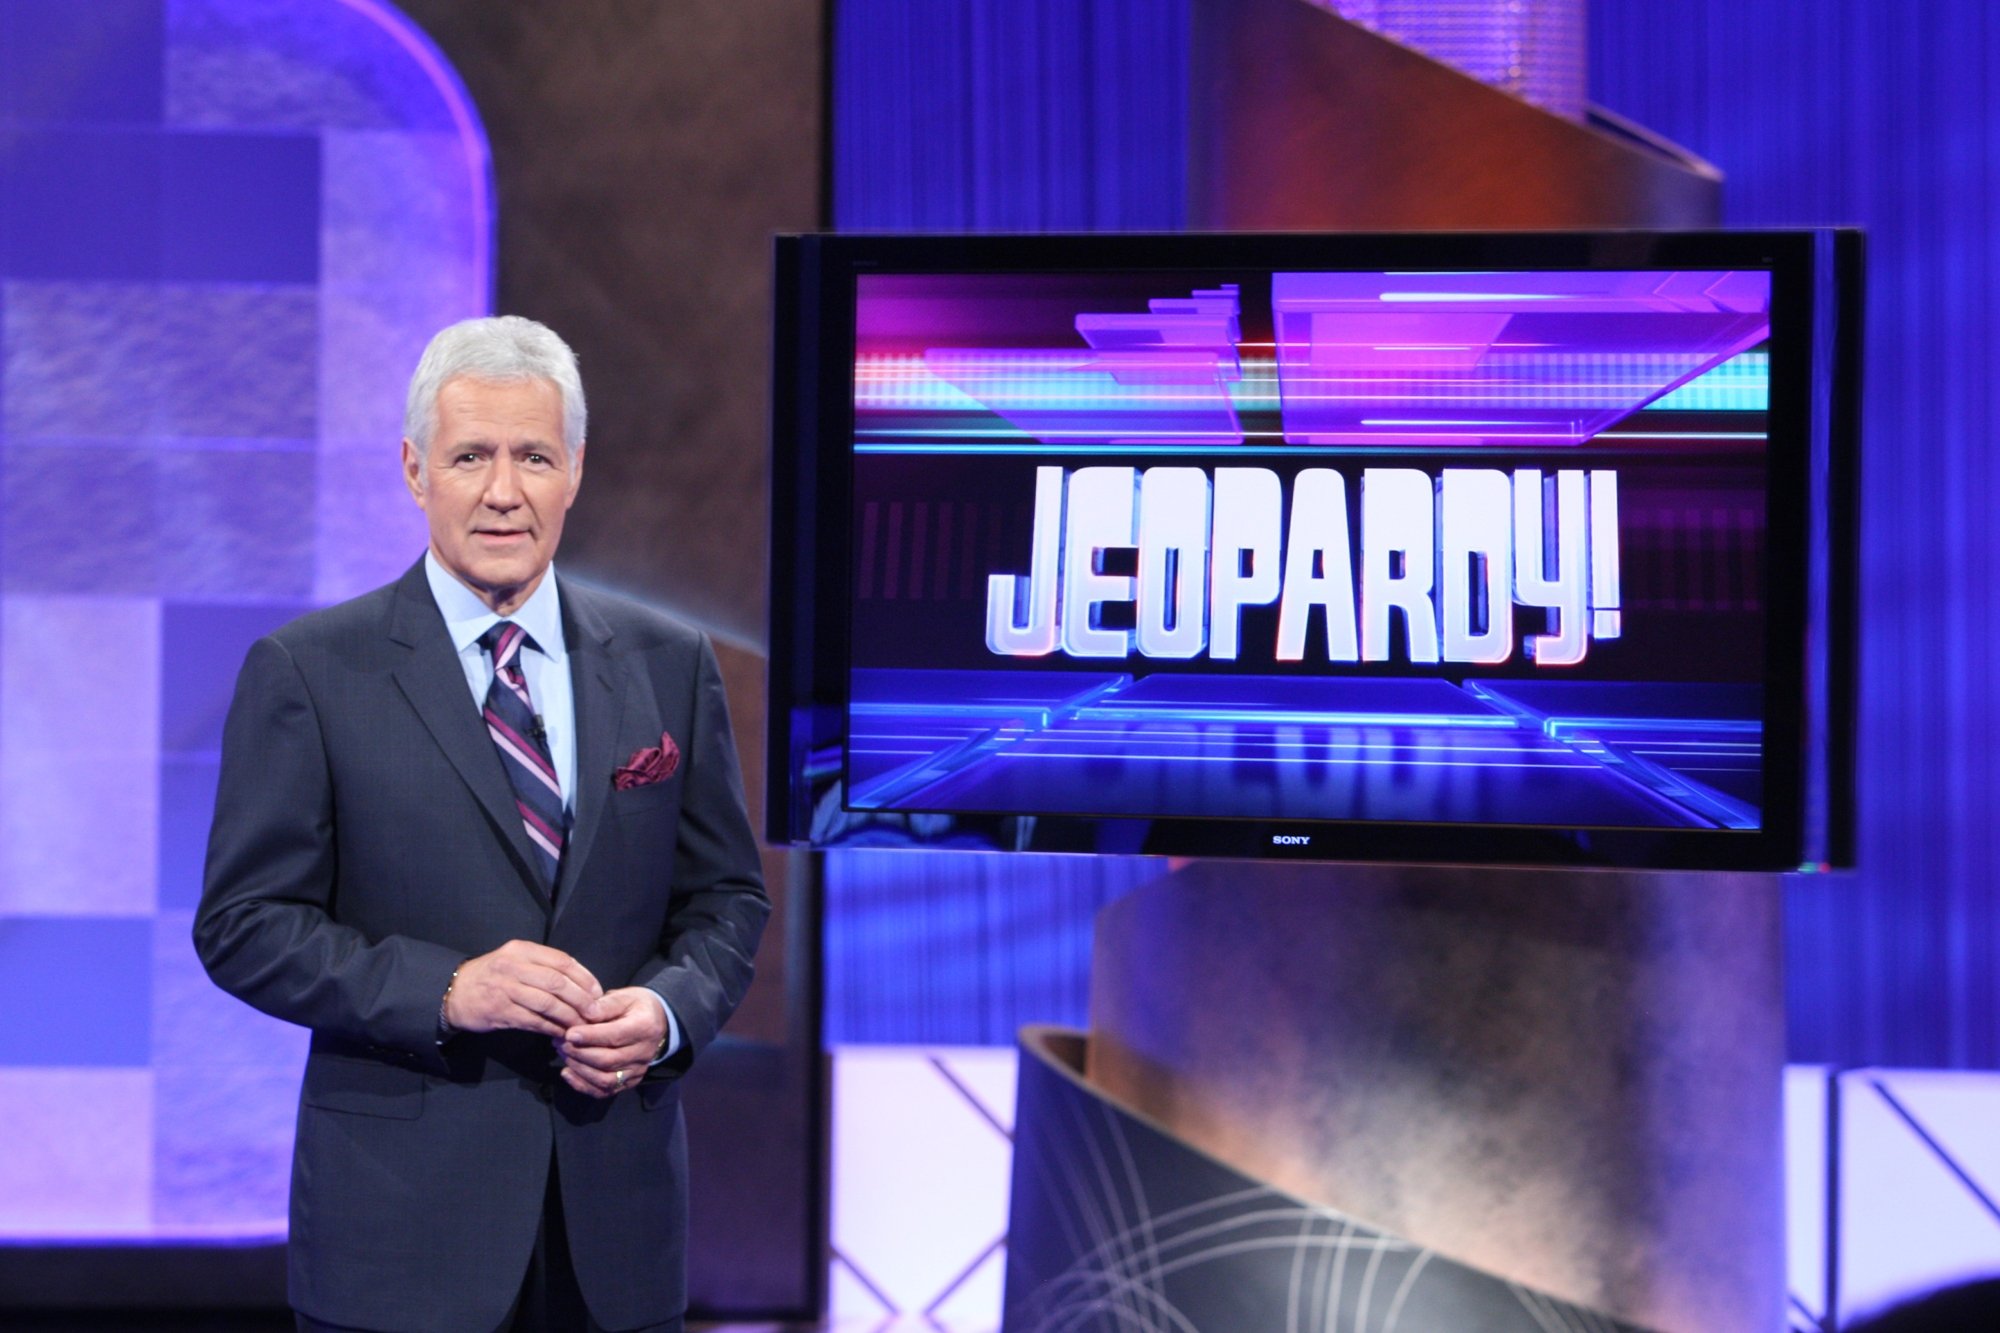 'Jeopardy!' Alex Trebek, who brought new buzzer rules. Trebek is wearing a suit, standing in front of a television with the 'Jeopardy!' logo on it